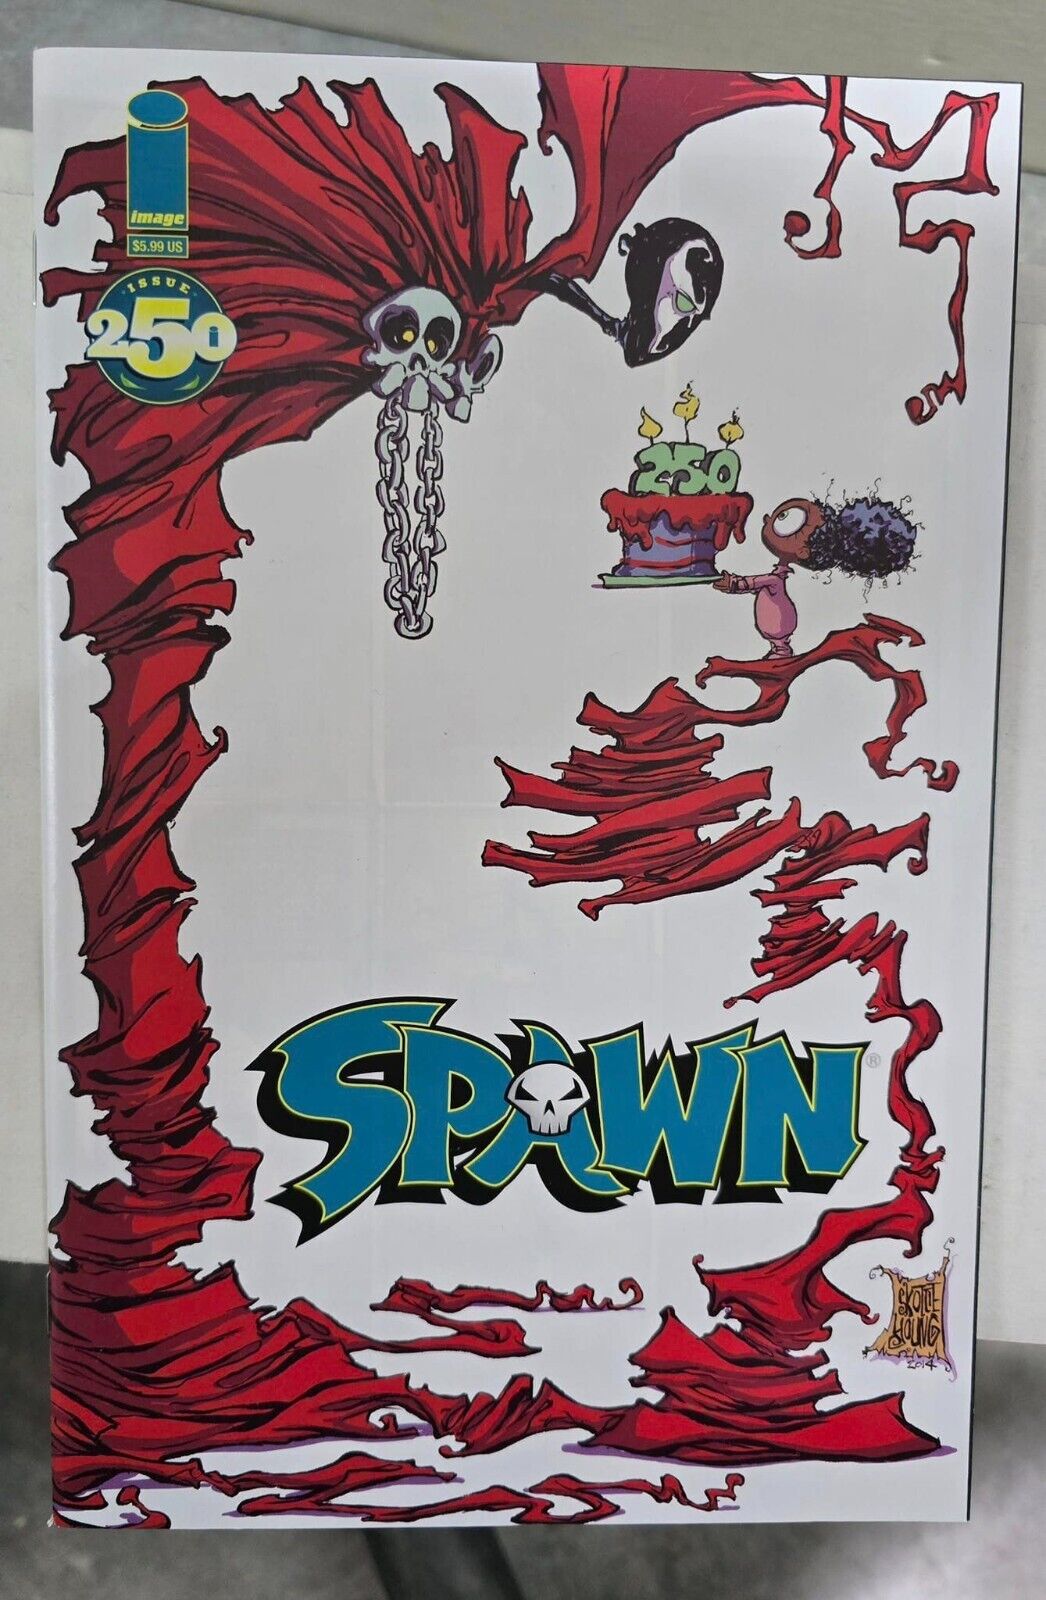 SPAWN #250 YOU PICK WHICH COVER YOU WANT...ALL ARE NEAR MINT UNREAD